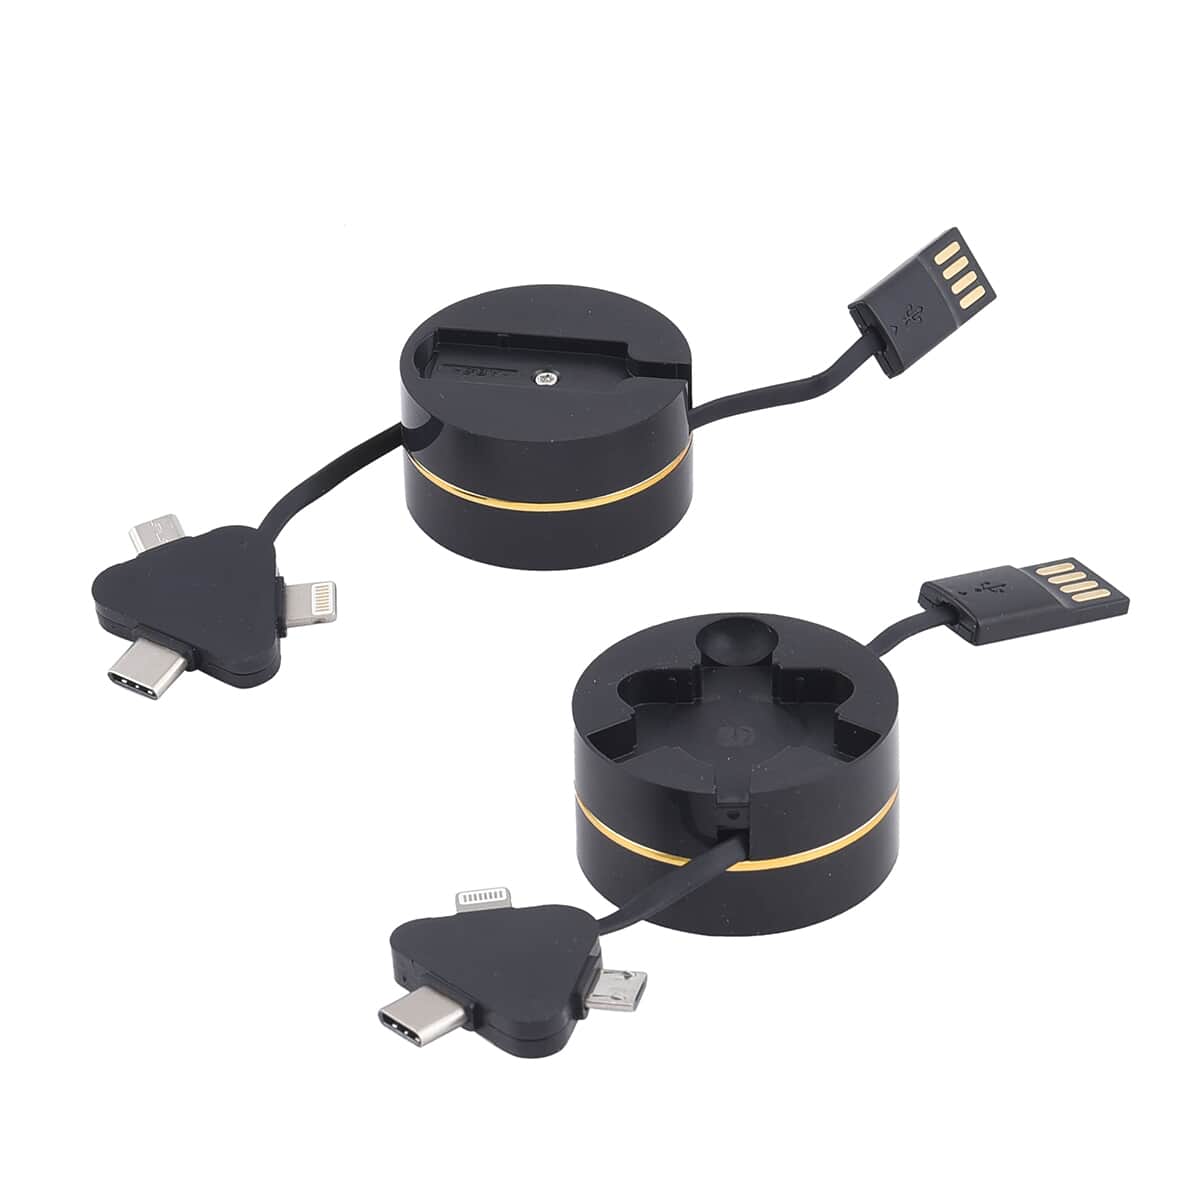 Homesmart Black 3-in-1 Retractable Charging Cable Box - Set of 2 (Built-in Lightning, Type-C, and Micro USB) image number 0